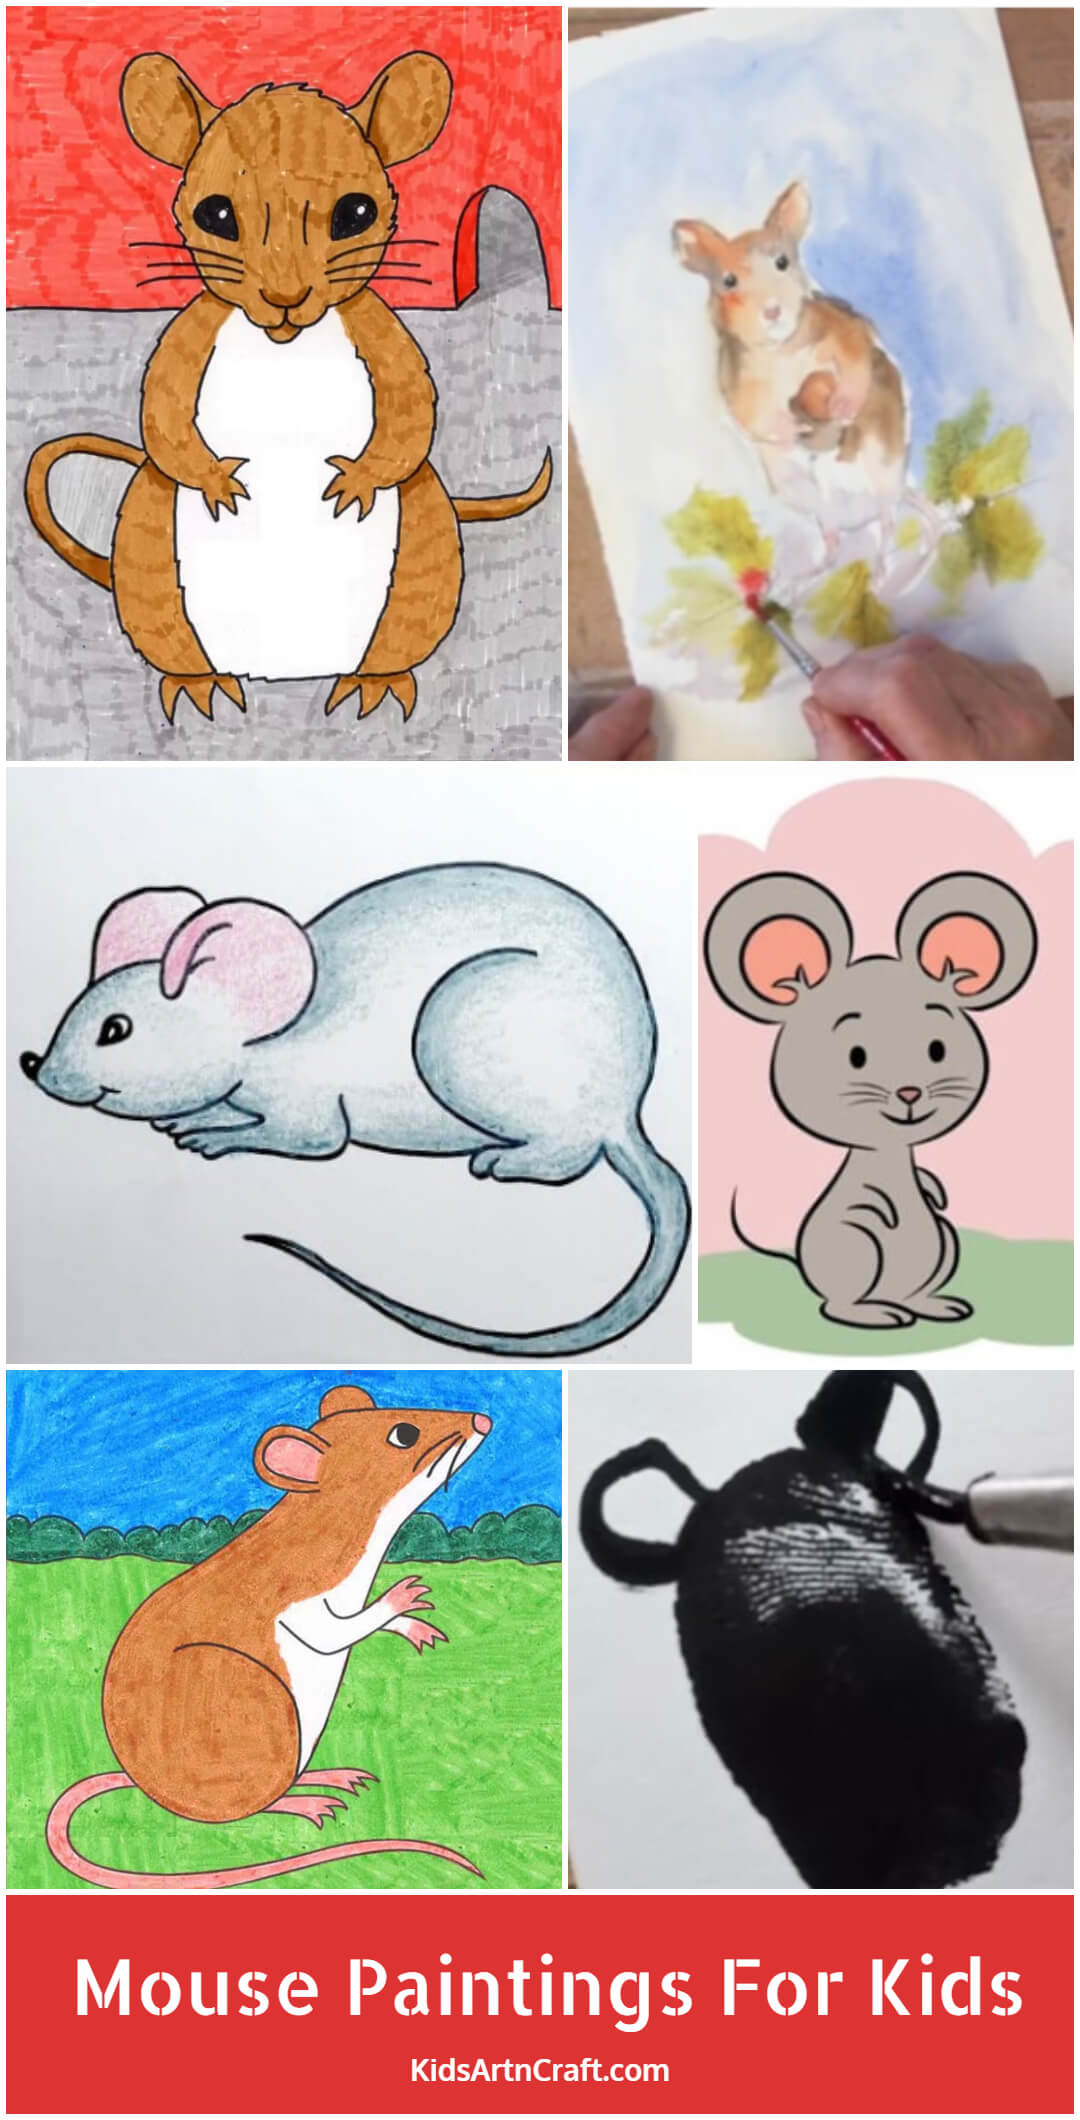 Mouse Paintings For Kids